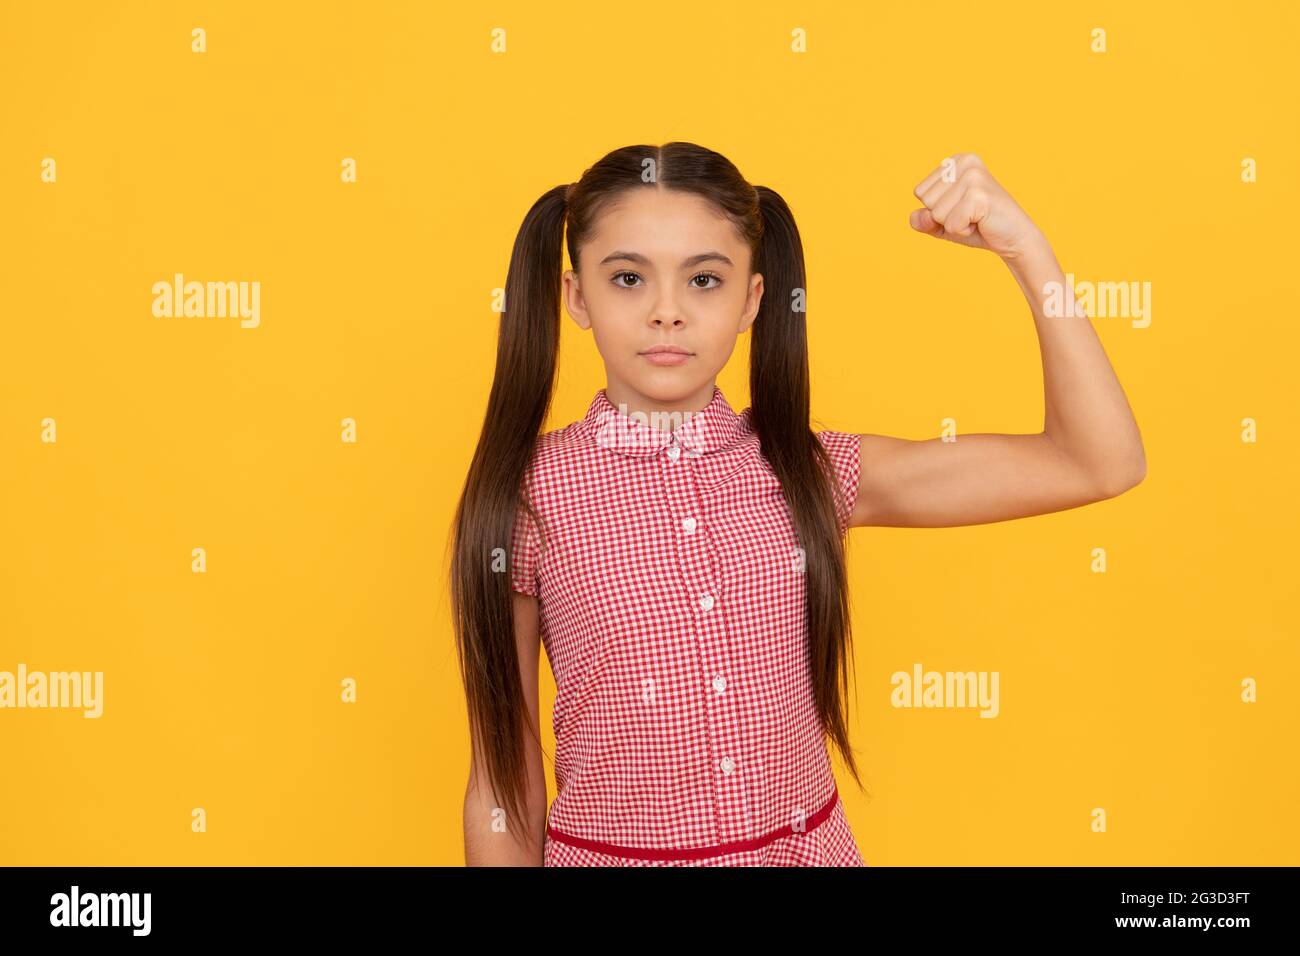 Serious girl child show power gesture flexing arm yellow background, strong Stock Photo